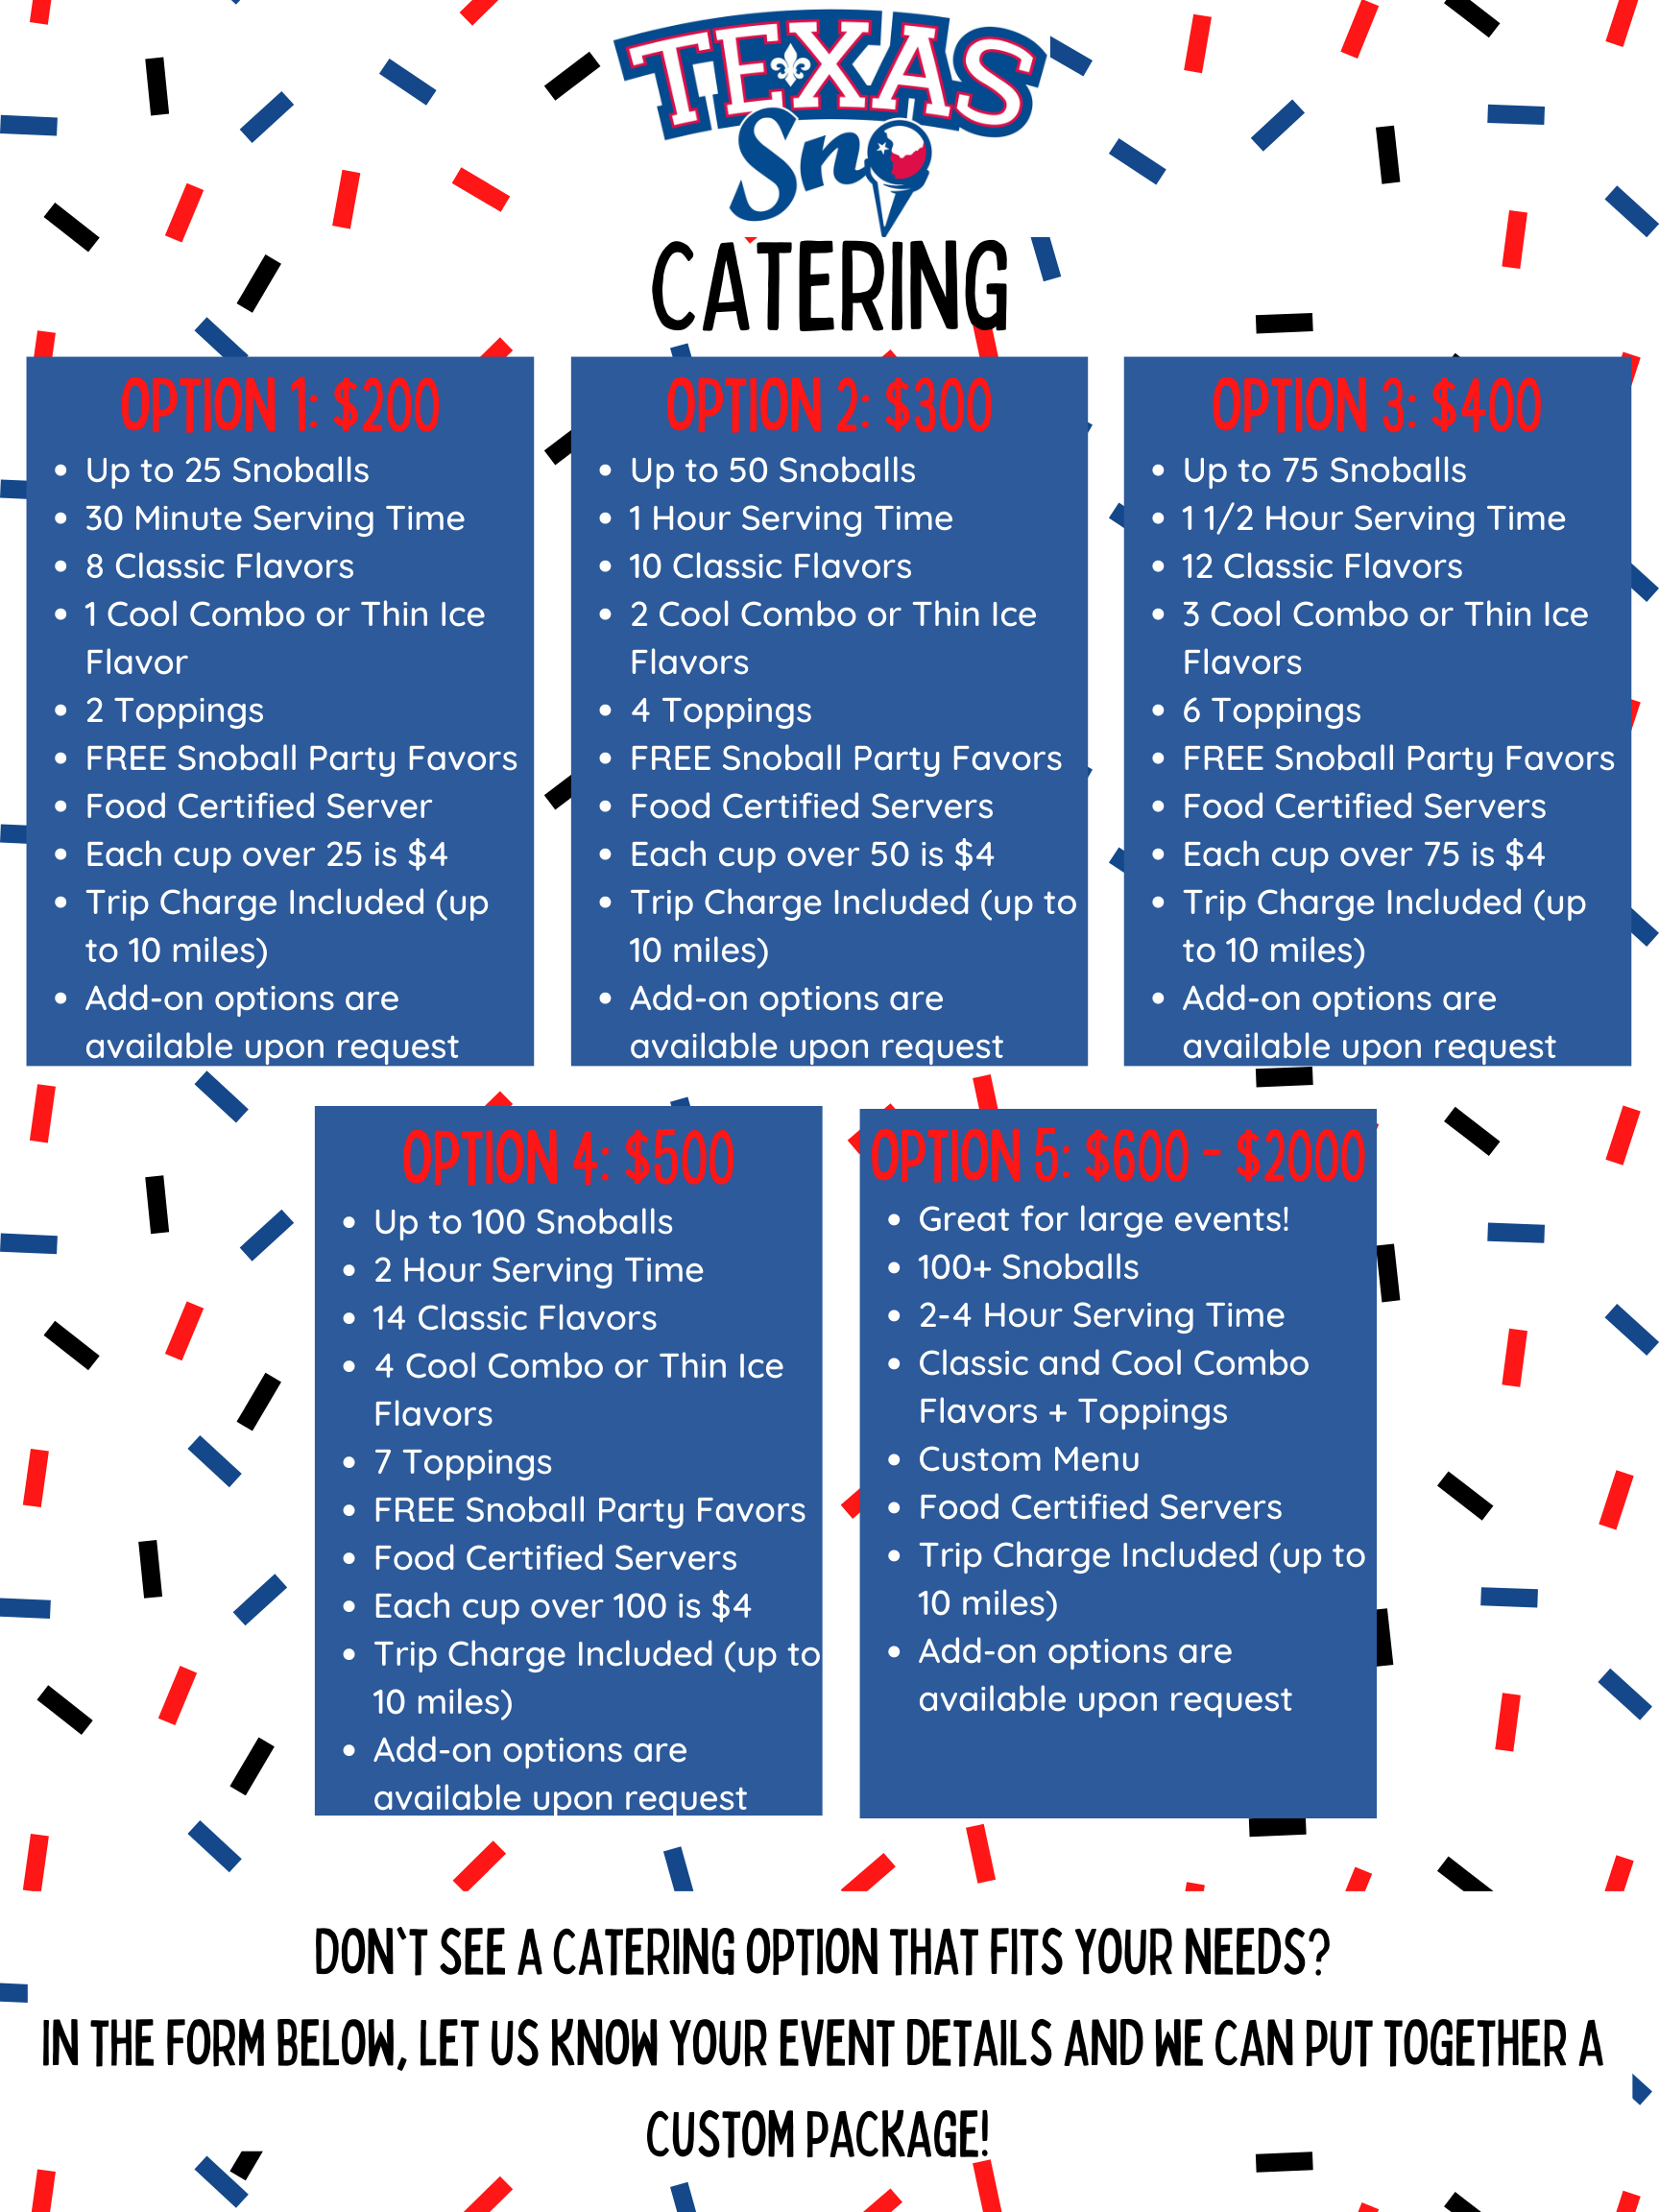 Texas Sno Catering Options, Policies, and Guidelines (8)